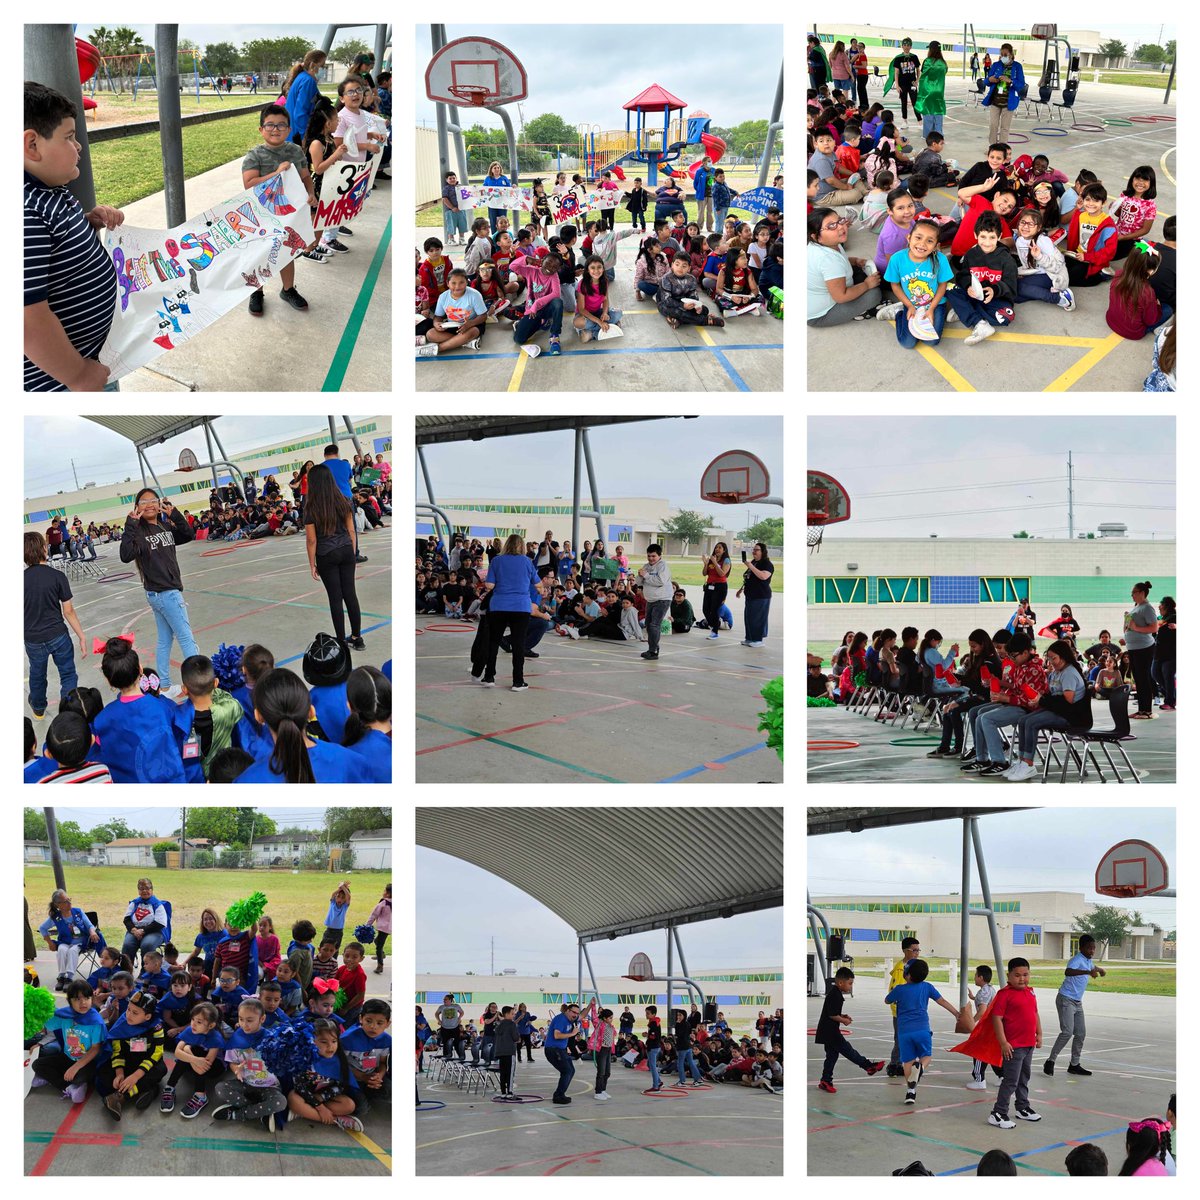 The Garcia STAAR Pep Rally was in full force as ALL our students & staff were cheering on our 3rd, 4th, & 5th grade students today. Reminder we need all 3rd, 4th, & 5th grade students on campus tomorrow by 7:50 AM to take their RLA STAAR exam. Go Navigators Go!!! @CCISD